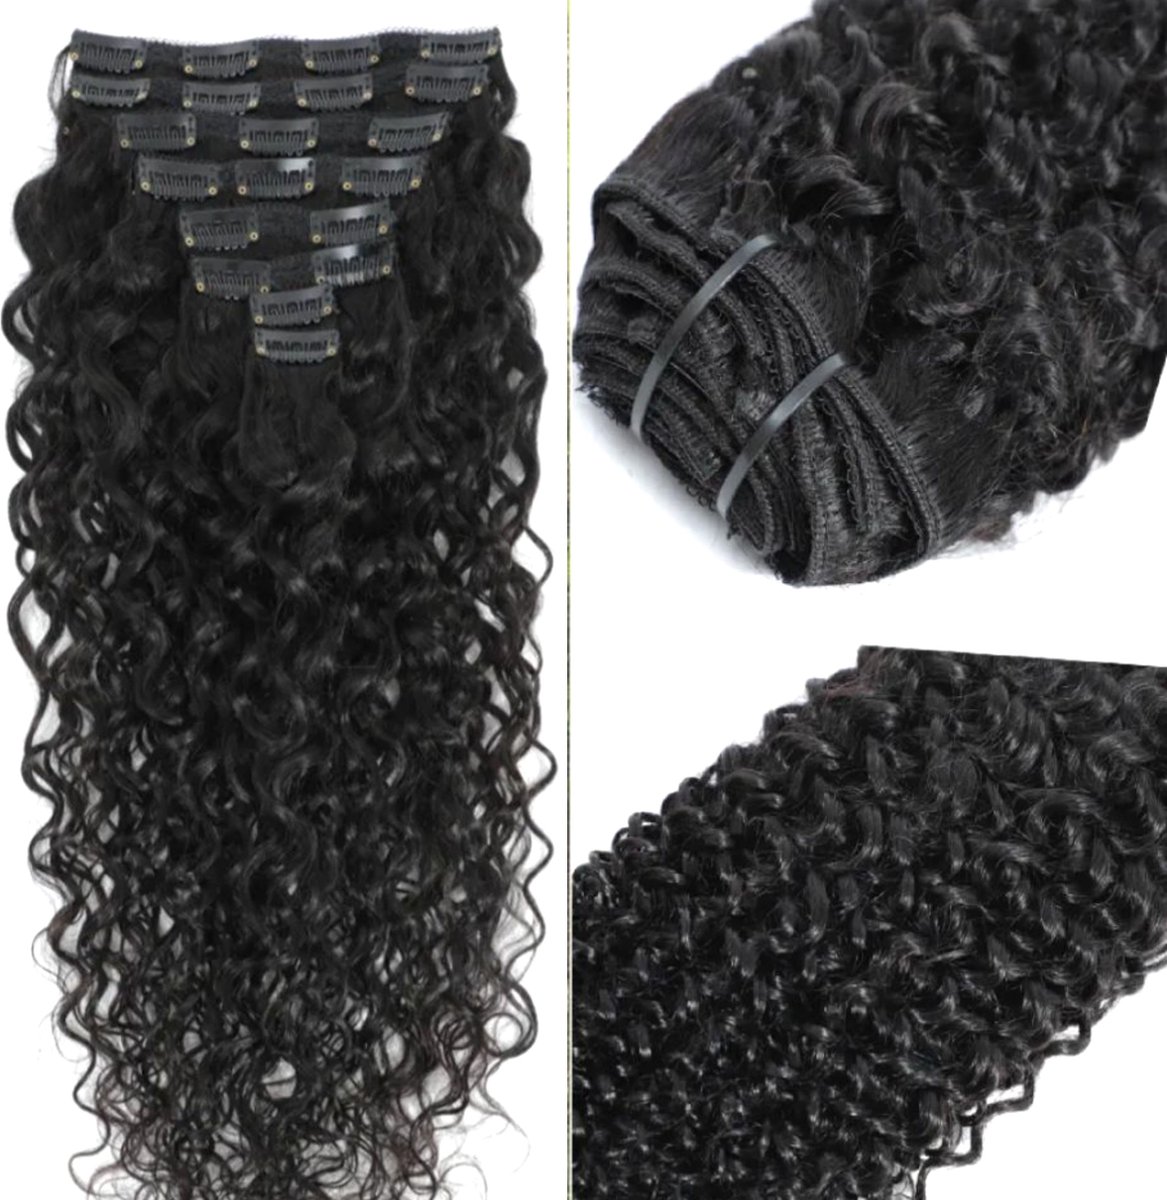 House of Royaltys - Virgina hair Straight 22 inch - natural black - 13x4 HD Lace frontal